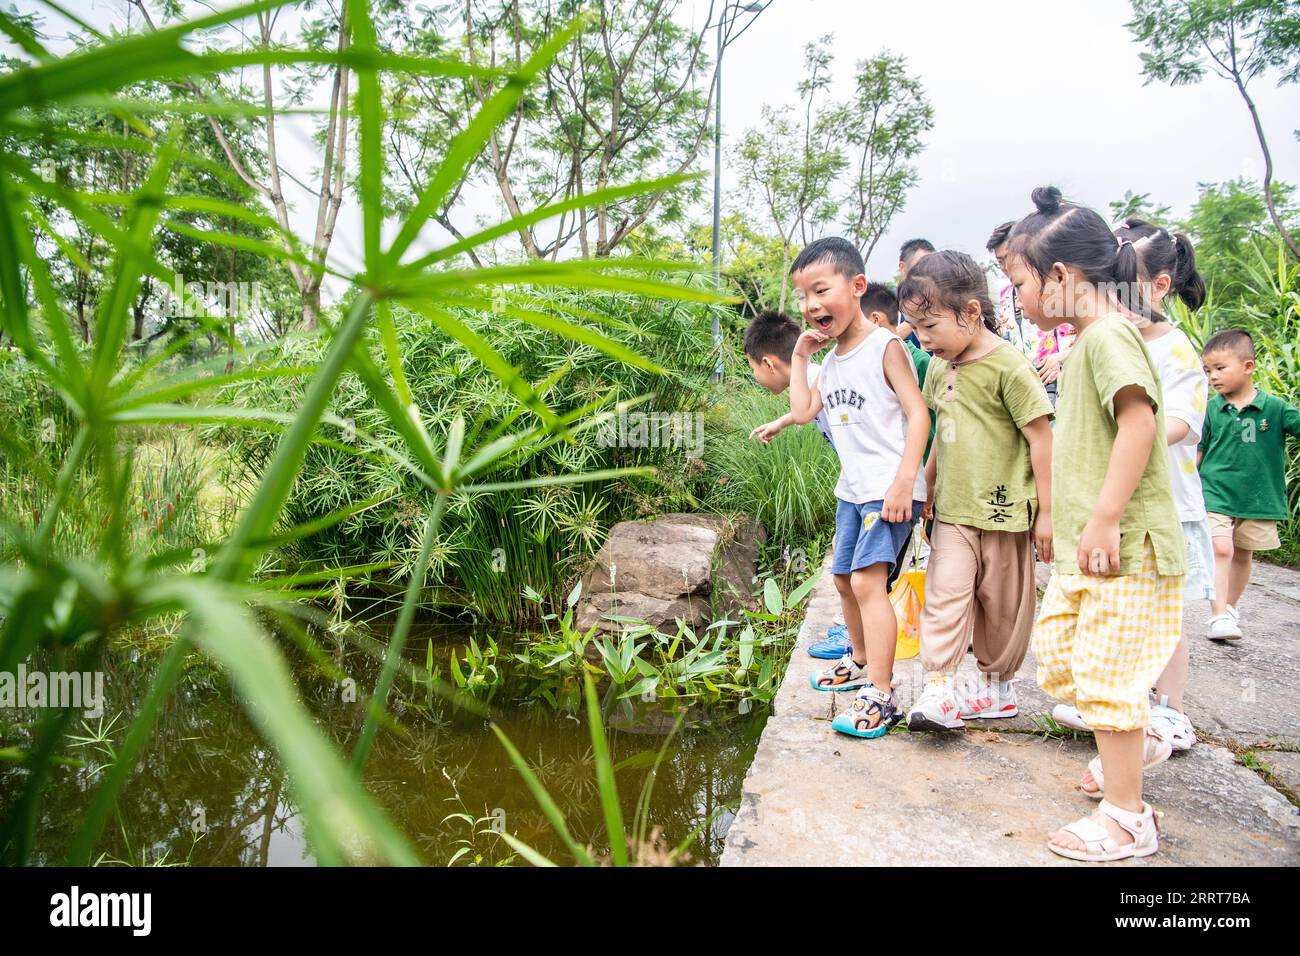 230704 -- CHONGQING, July 4, 2023 -- Children learn to identify aquatic organisms during an ecological education tour on Guangyang Isle in southwest China s Chongqing, July 3, 2023. Located at the most extensive green island in the upper reaches of the Yangtze River, Guangyang Isle, covering around 10 square km, has a vegetation coverage rate of over 90 percent, and 594 species of plants and 452 species of animals have been recorded. But its ecological system and biodiversity were severely damaged due to a number of aggressive real estate projects that had lasted for years. In 2017, the commer Stock Photo